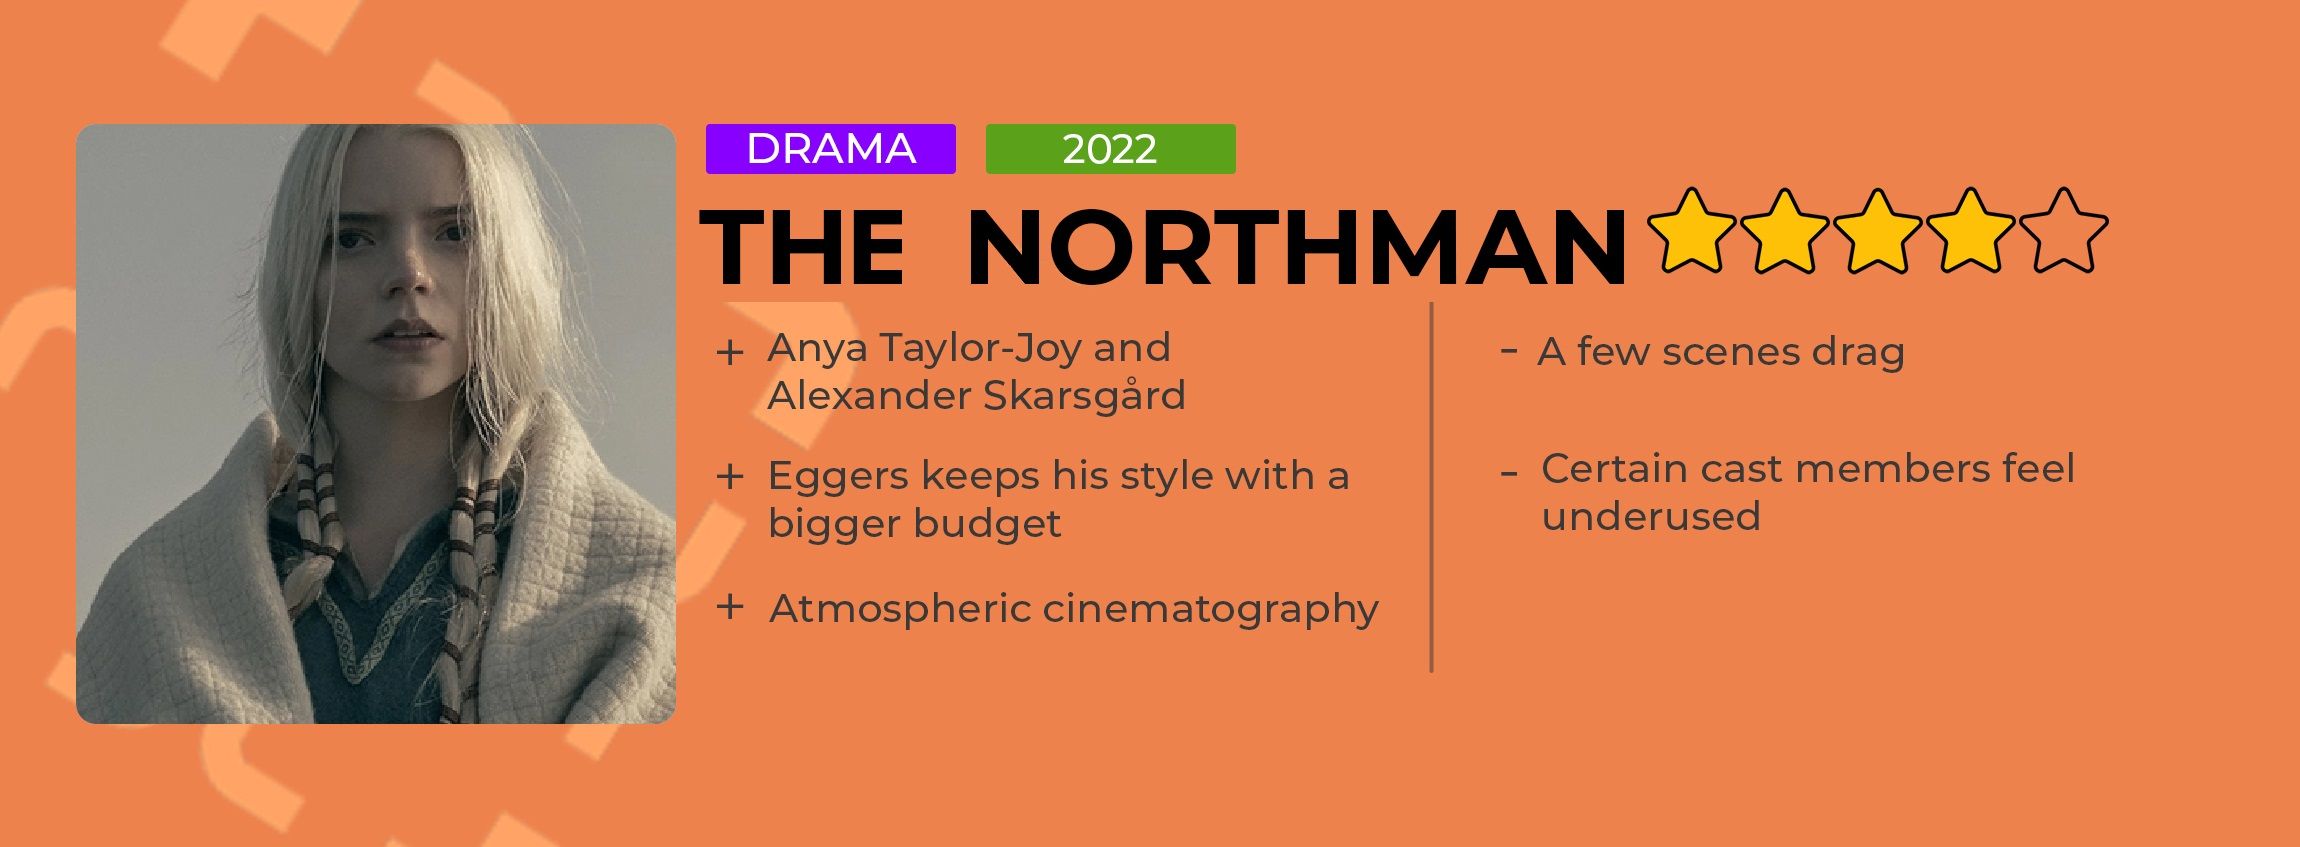 Northman-Review-Card-1